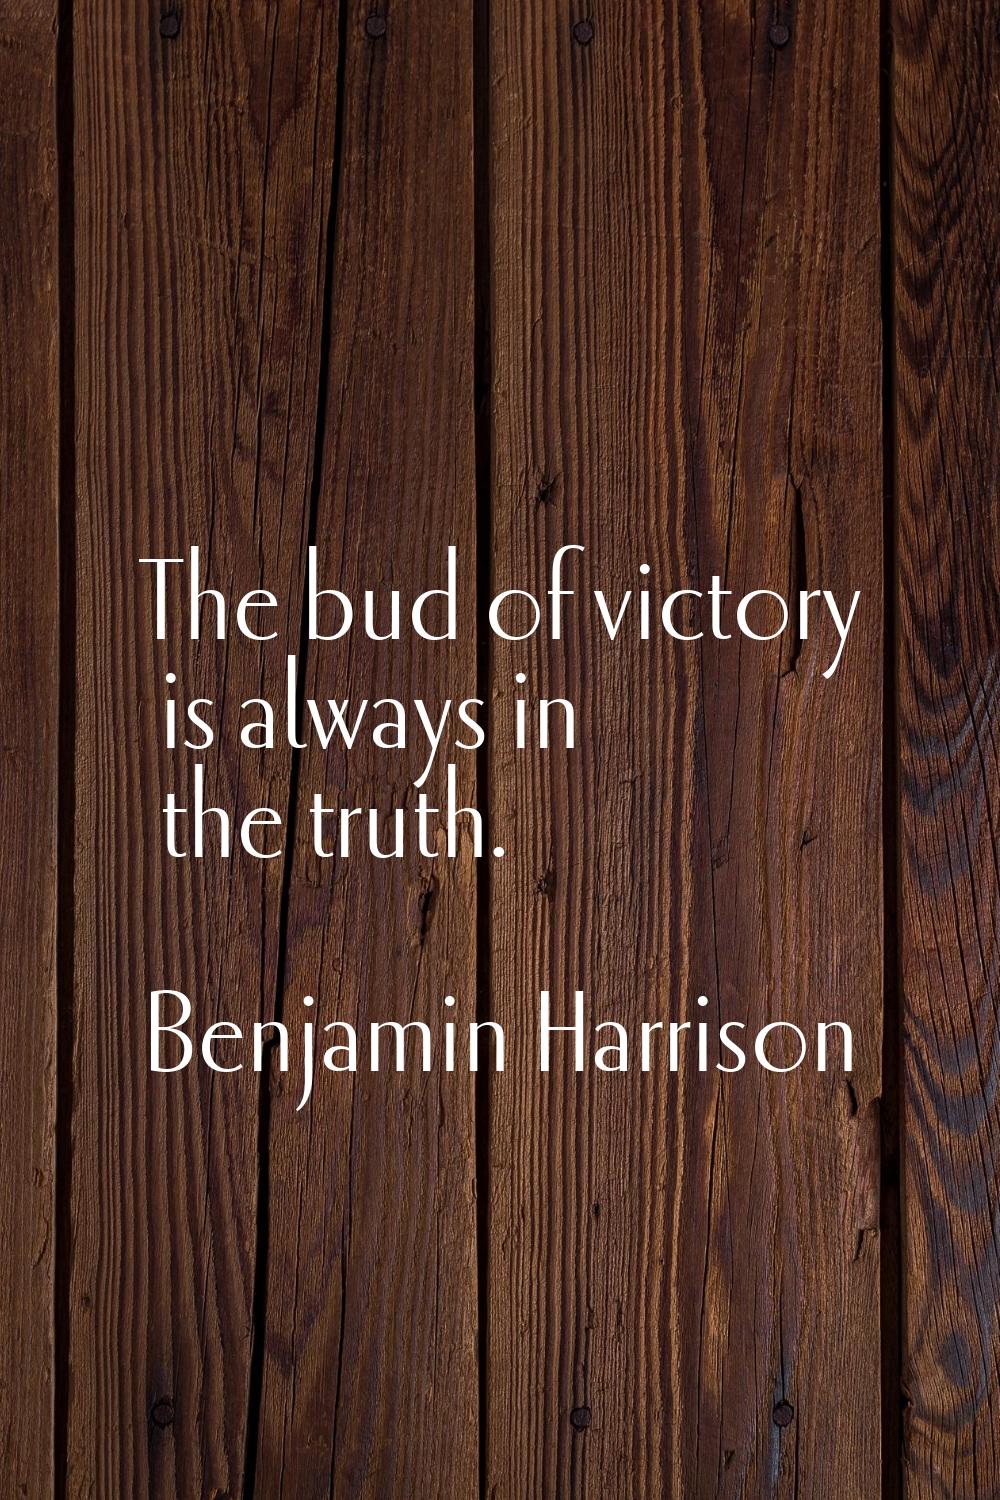 The bud of victory is always in the truth.